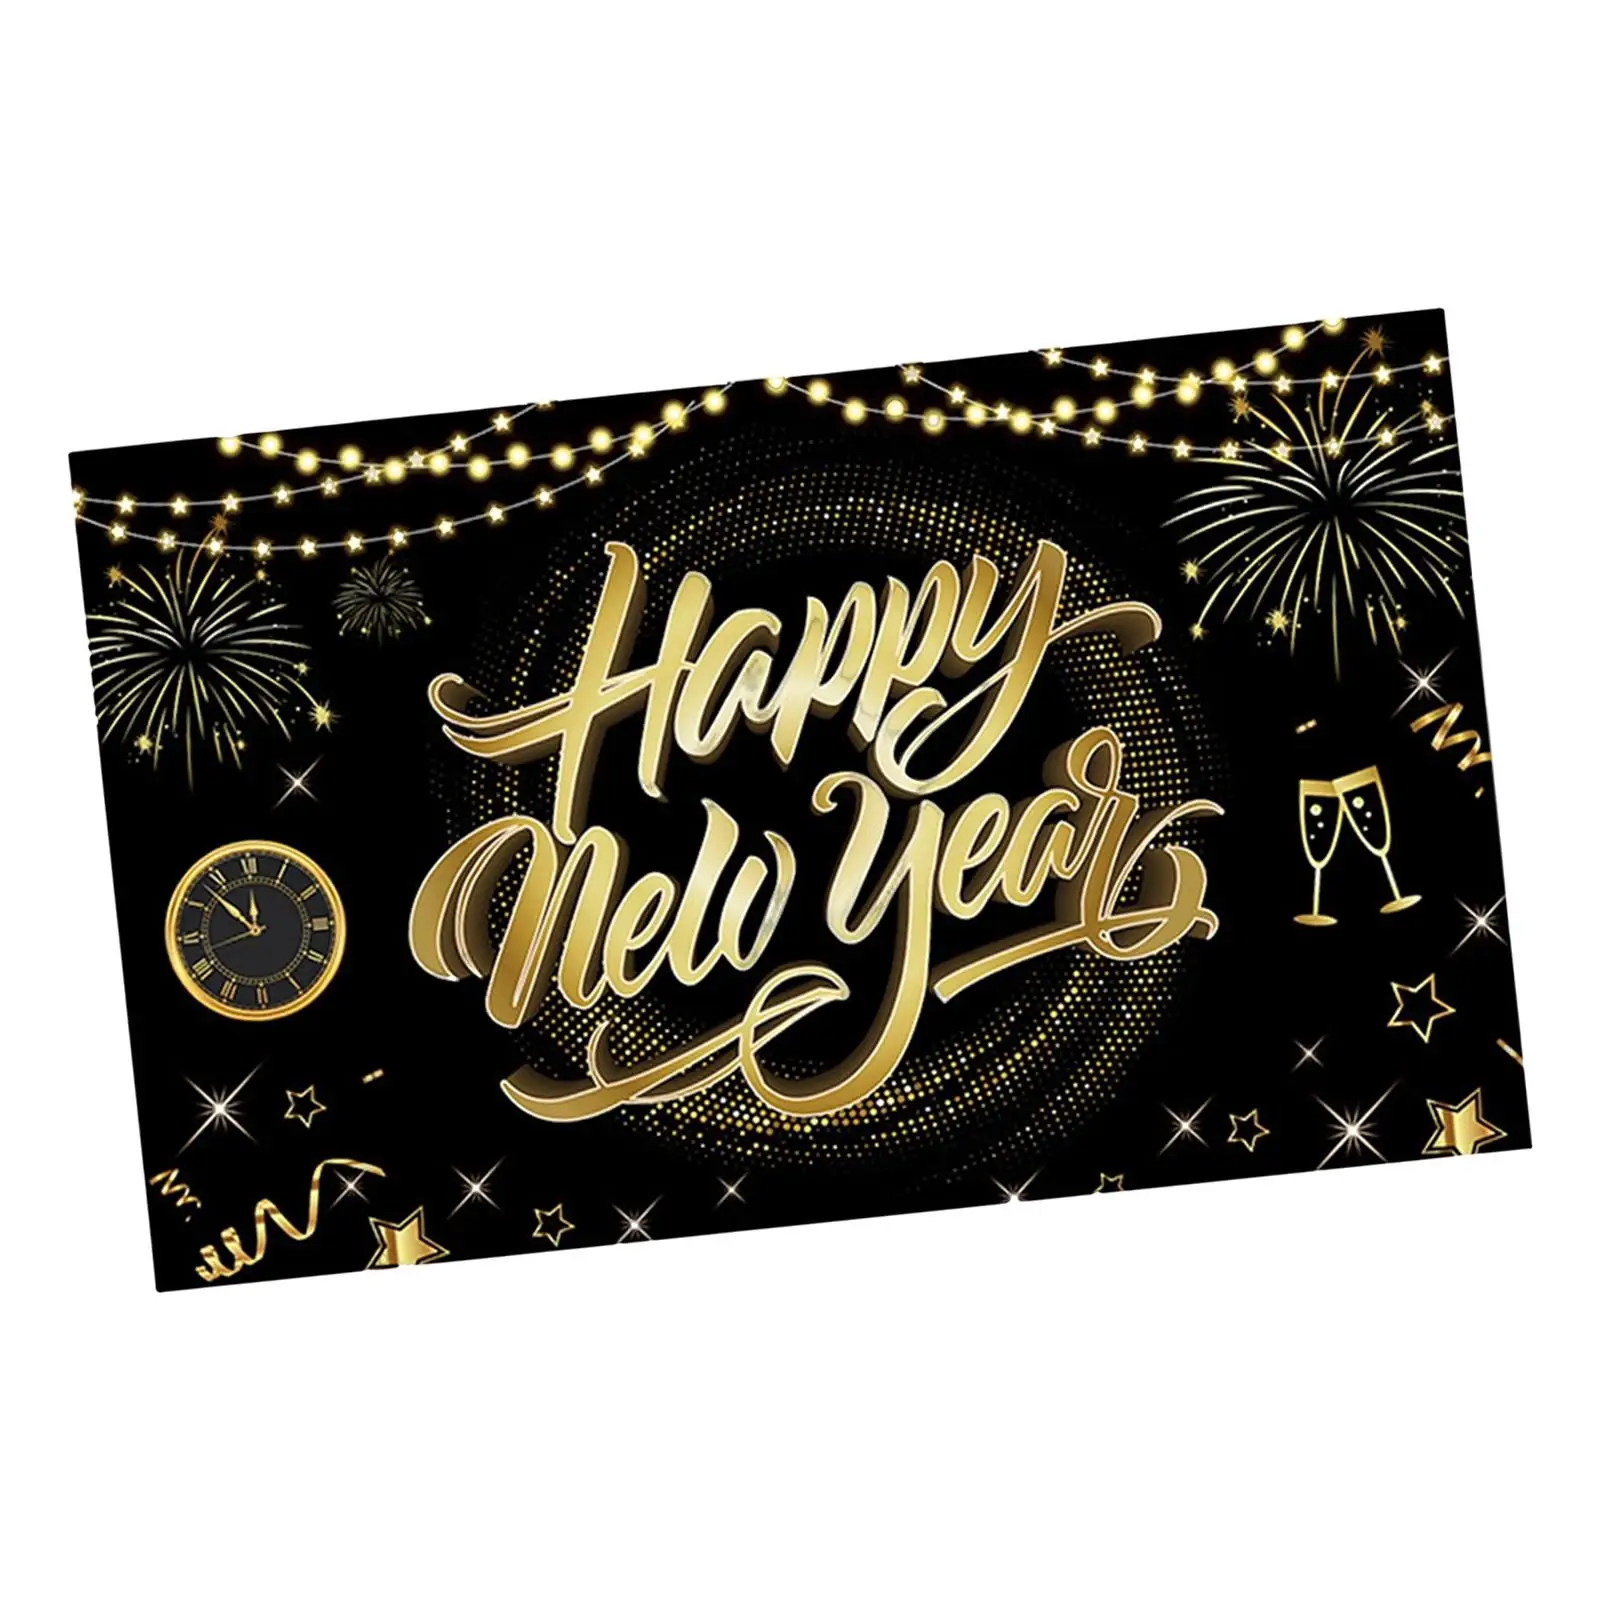 Fabric Wall Sign Poster Backdrop Home Photo Prop Decorations Holiday Bedroom Celebration Ornament Happy New Year Banner 2023